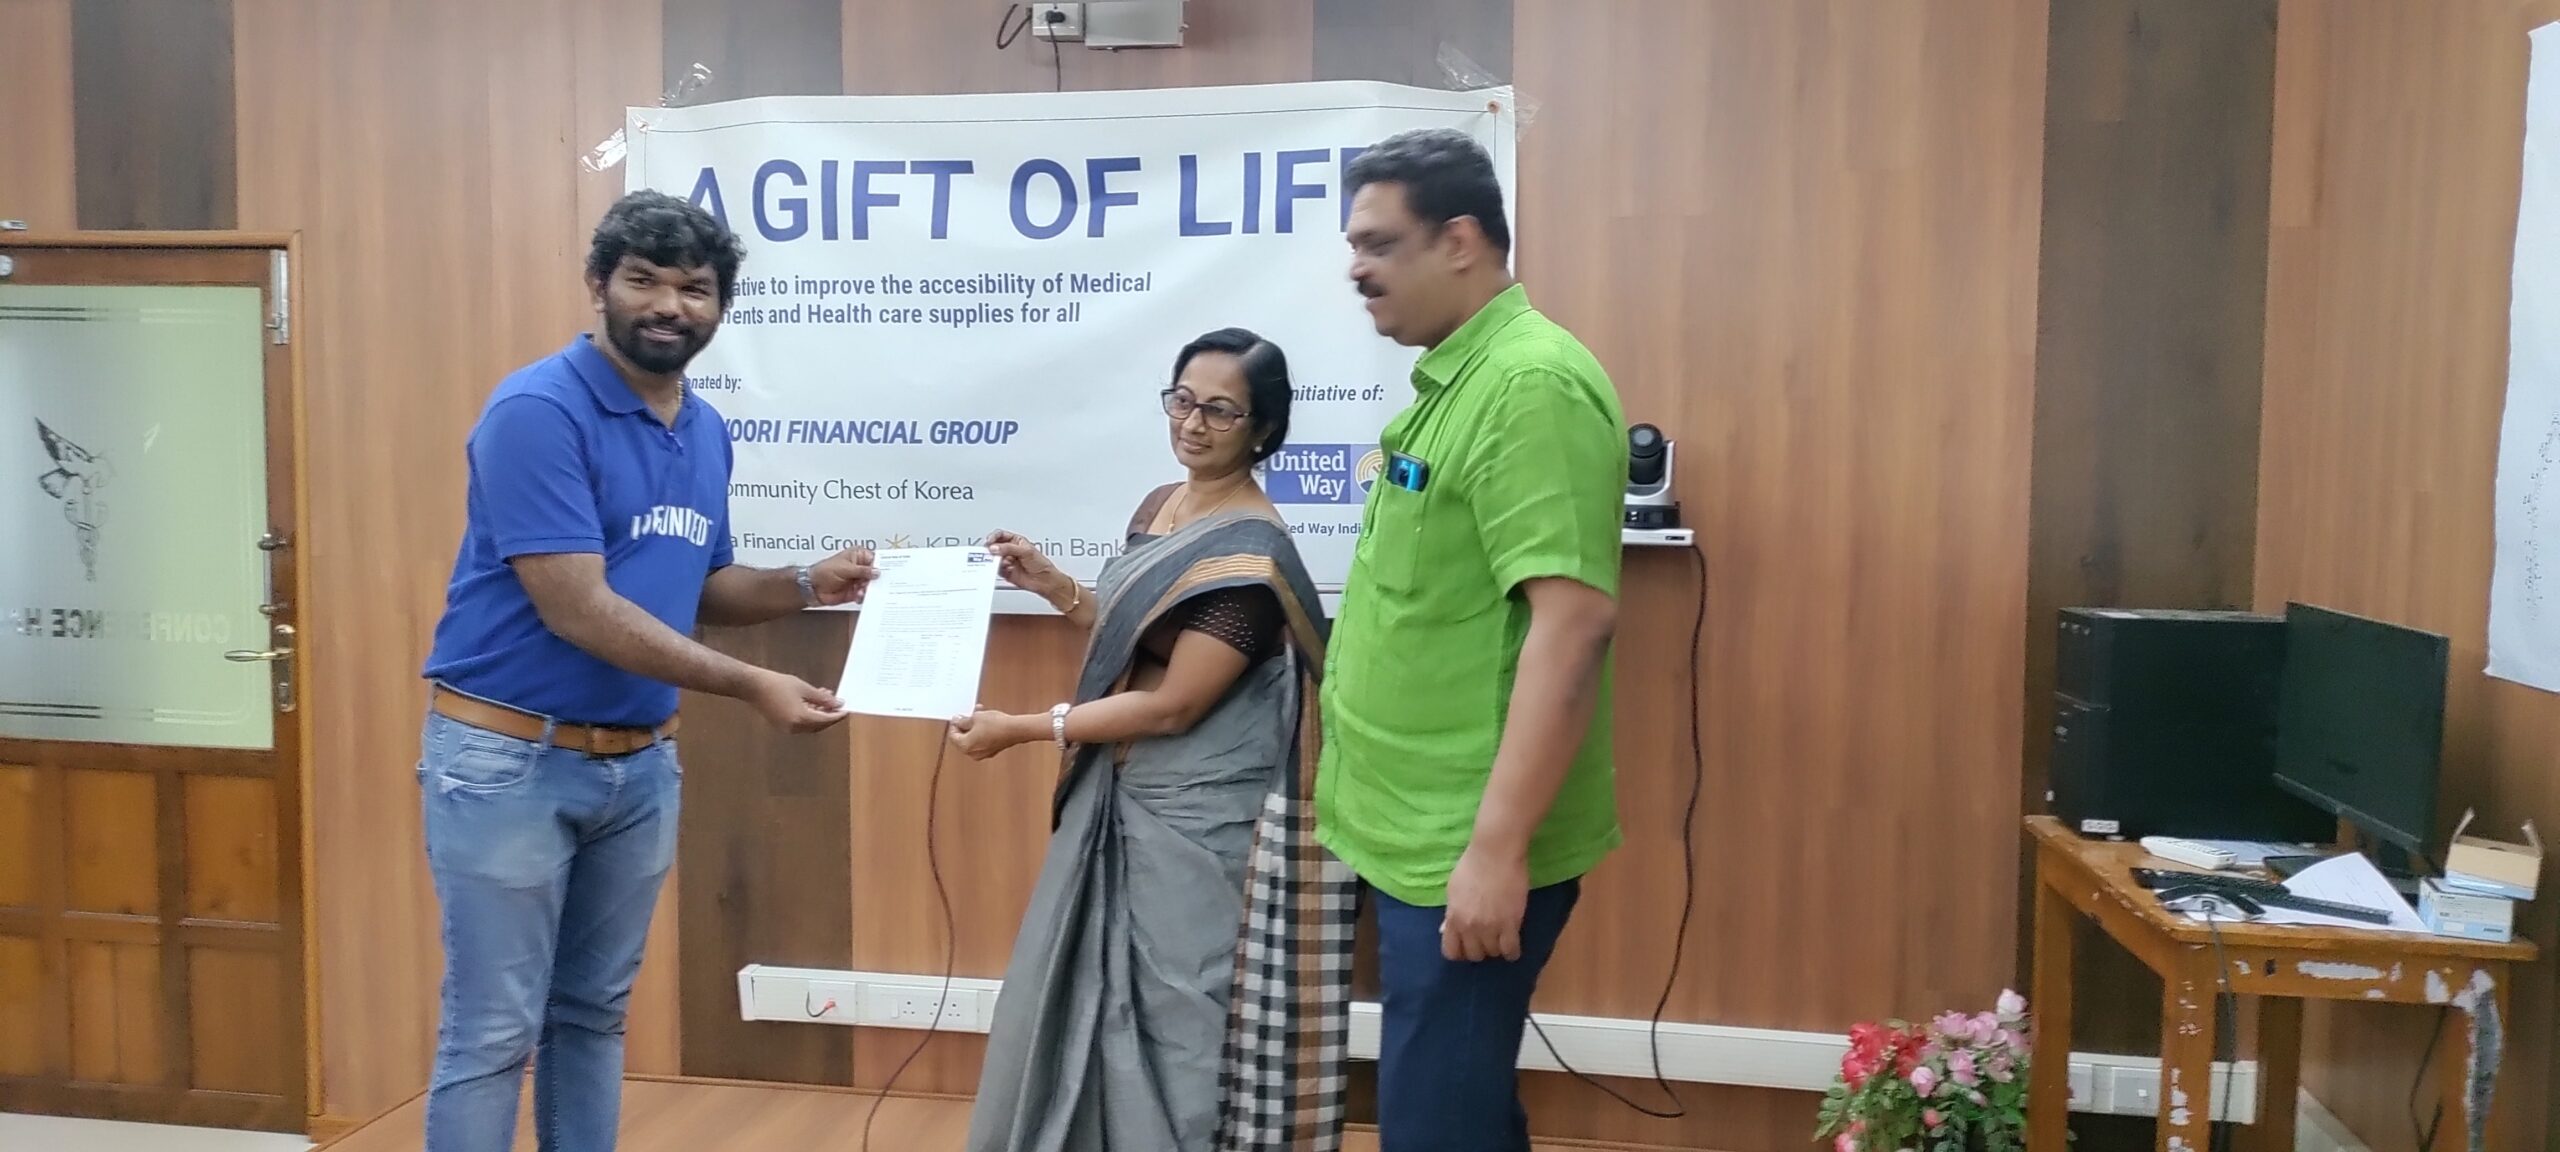 United Way India’s Gift of Life initiative, medical assistance to Public Health Institutions in Kerala.